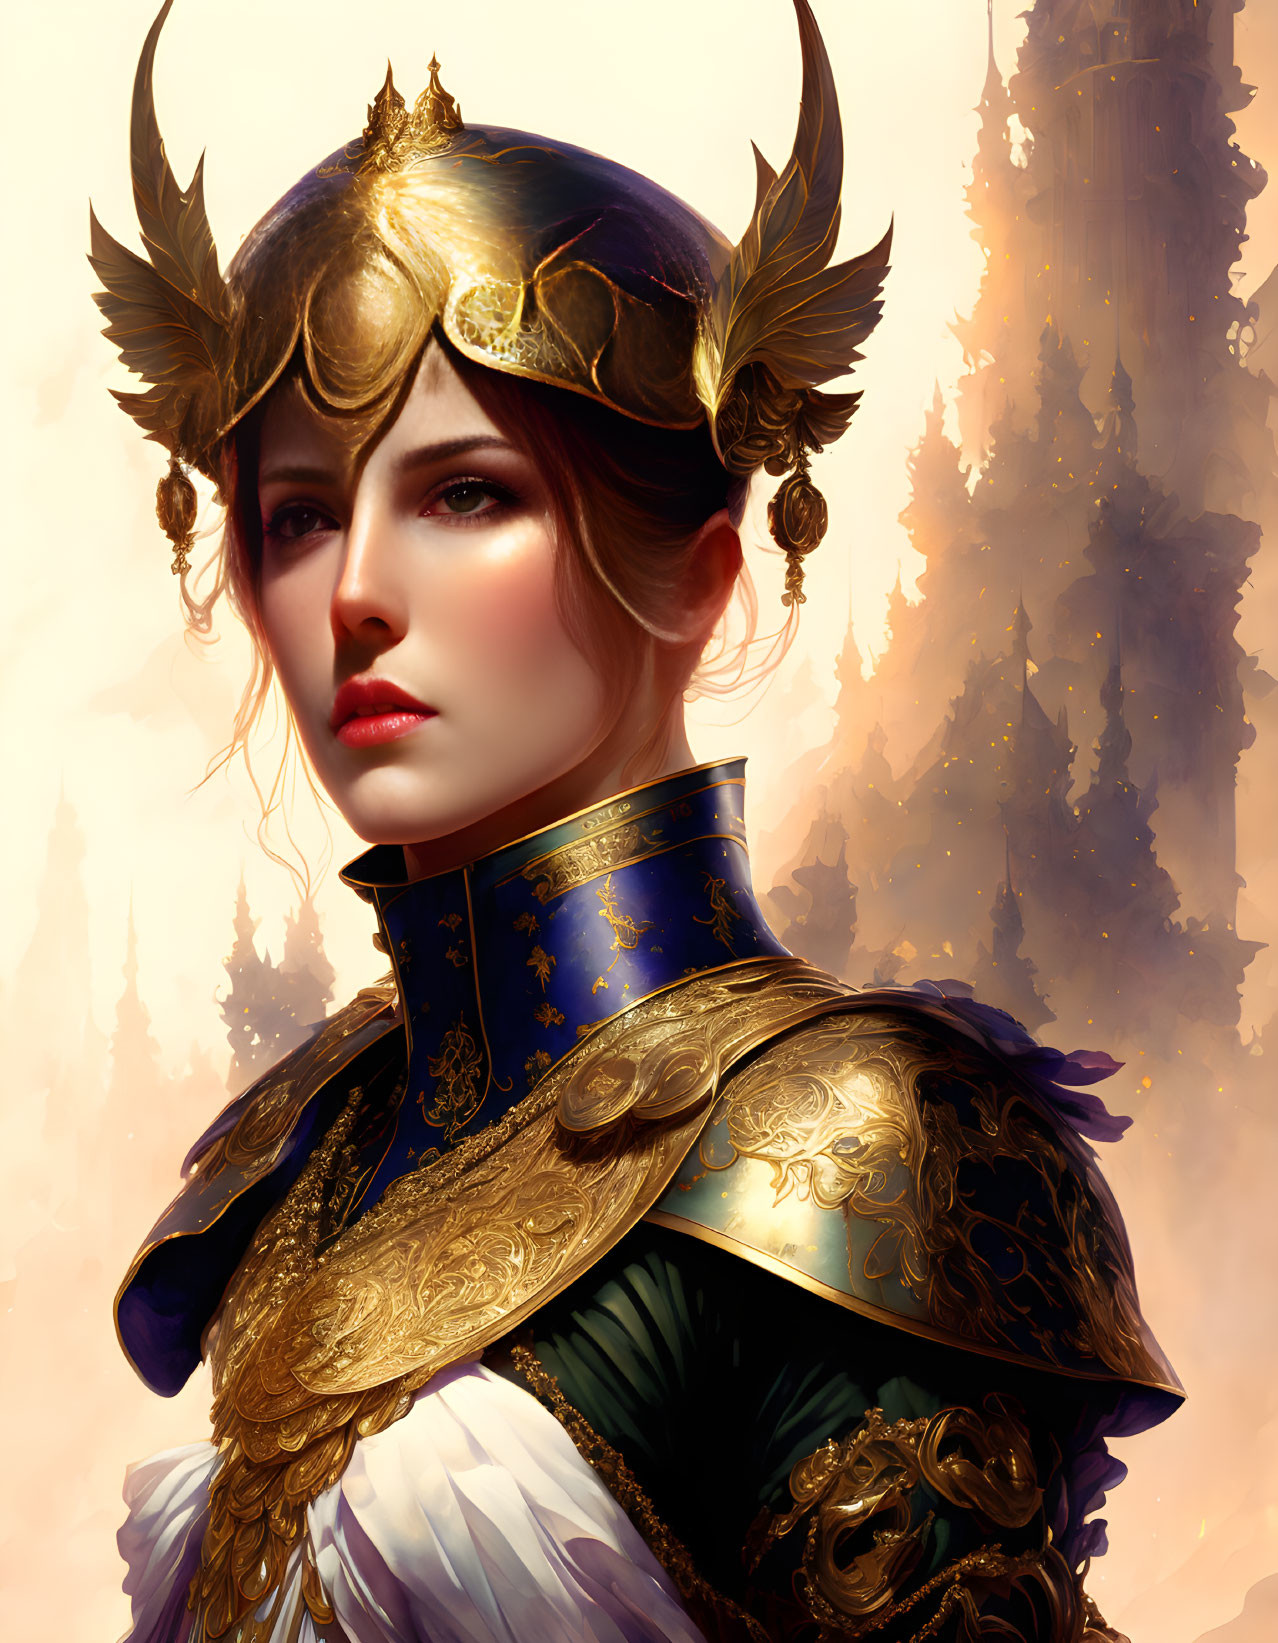 Digital artwork featuring woman in ornate golden crown and armor on fiery background